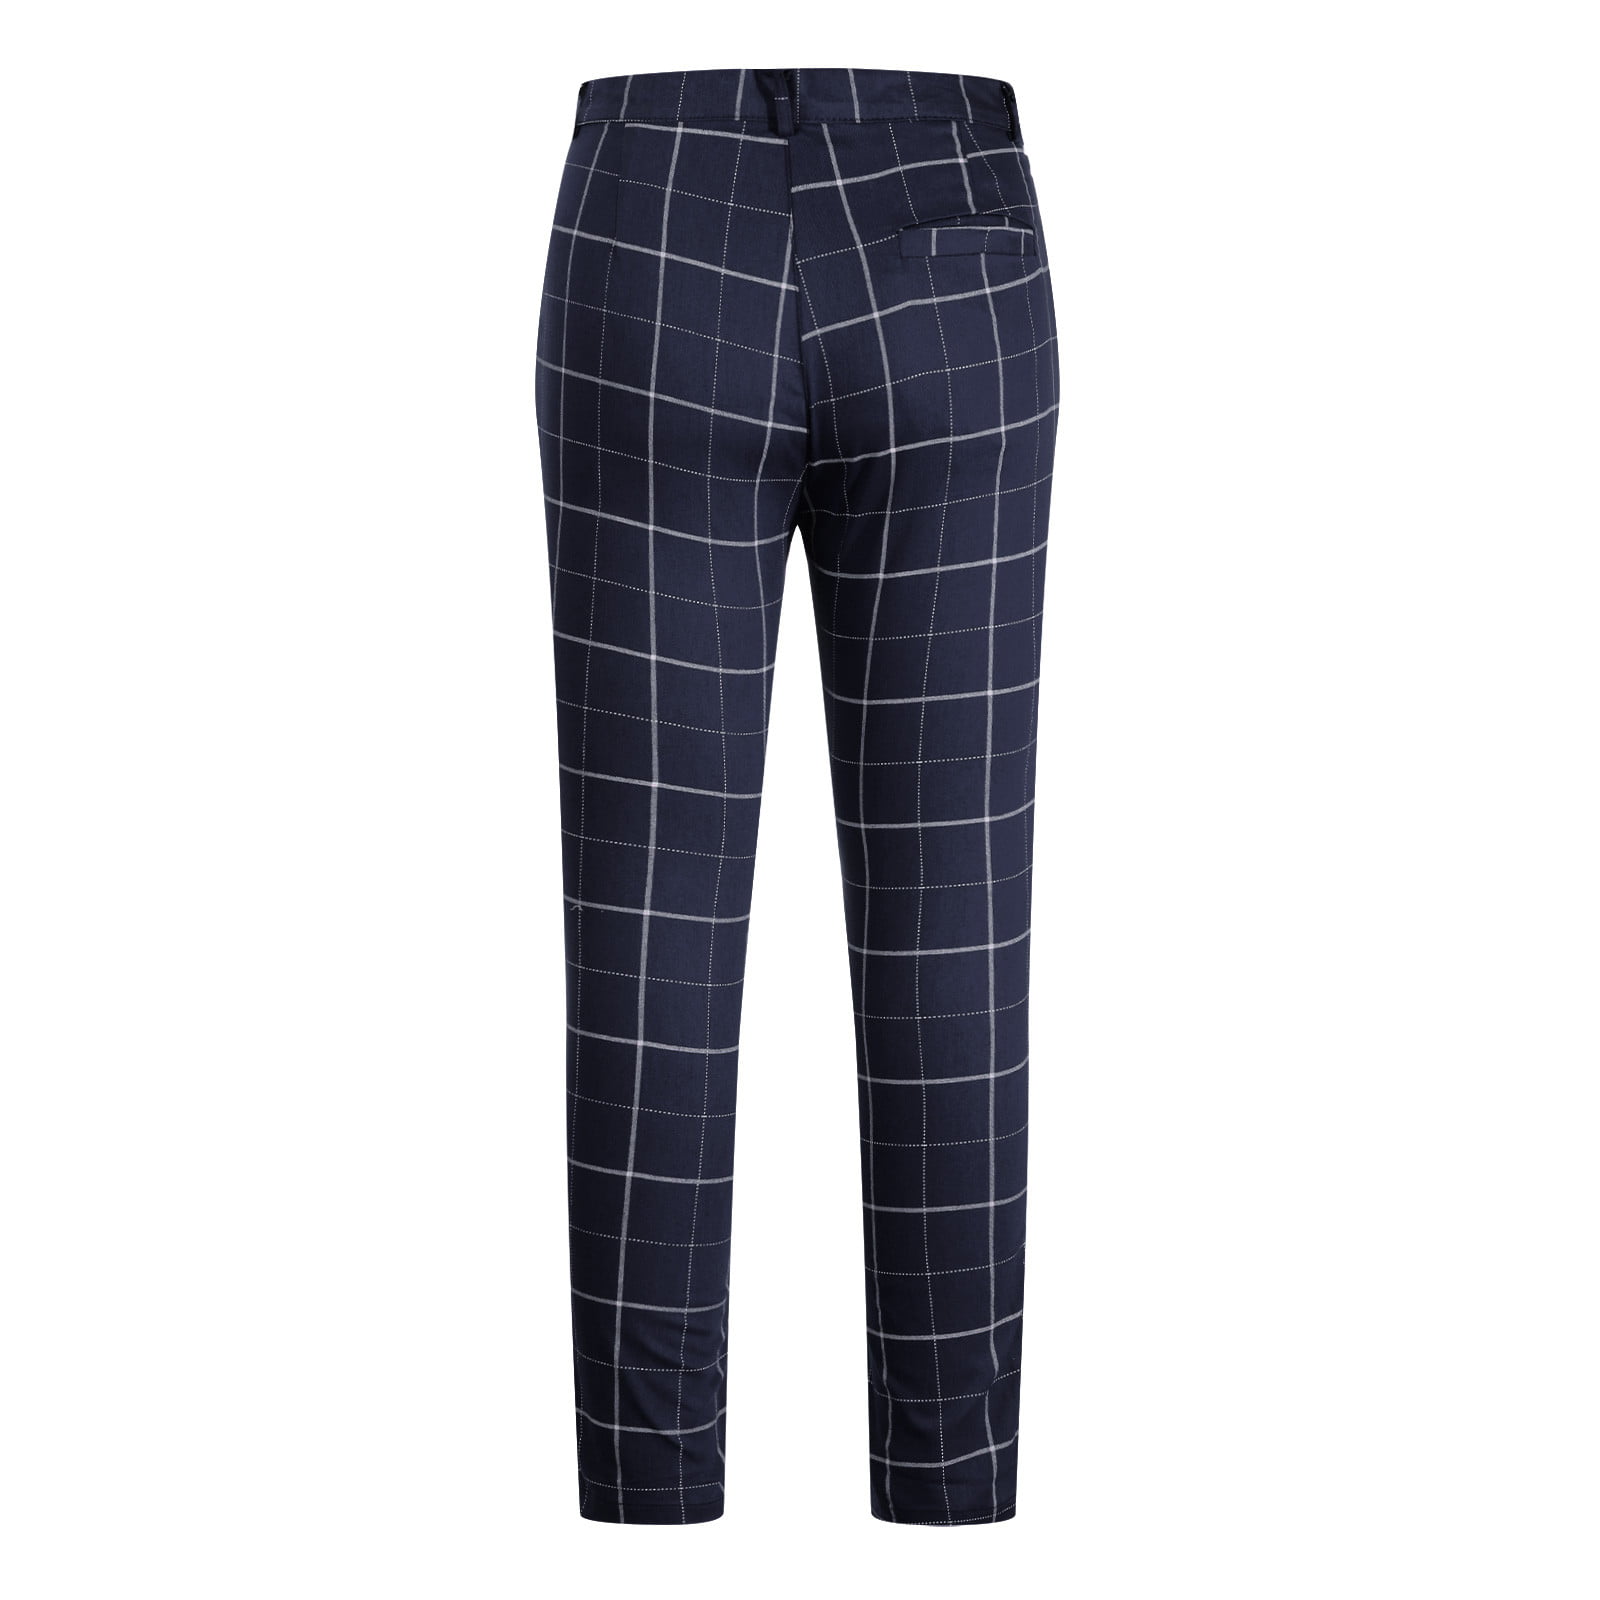 BOSS - Slim-fit pants in checked crease-resistant fabric